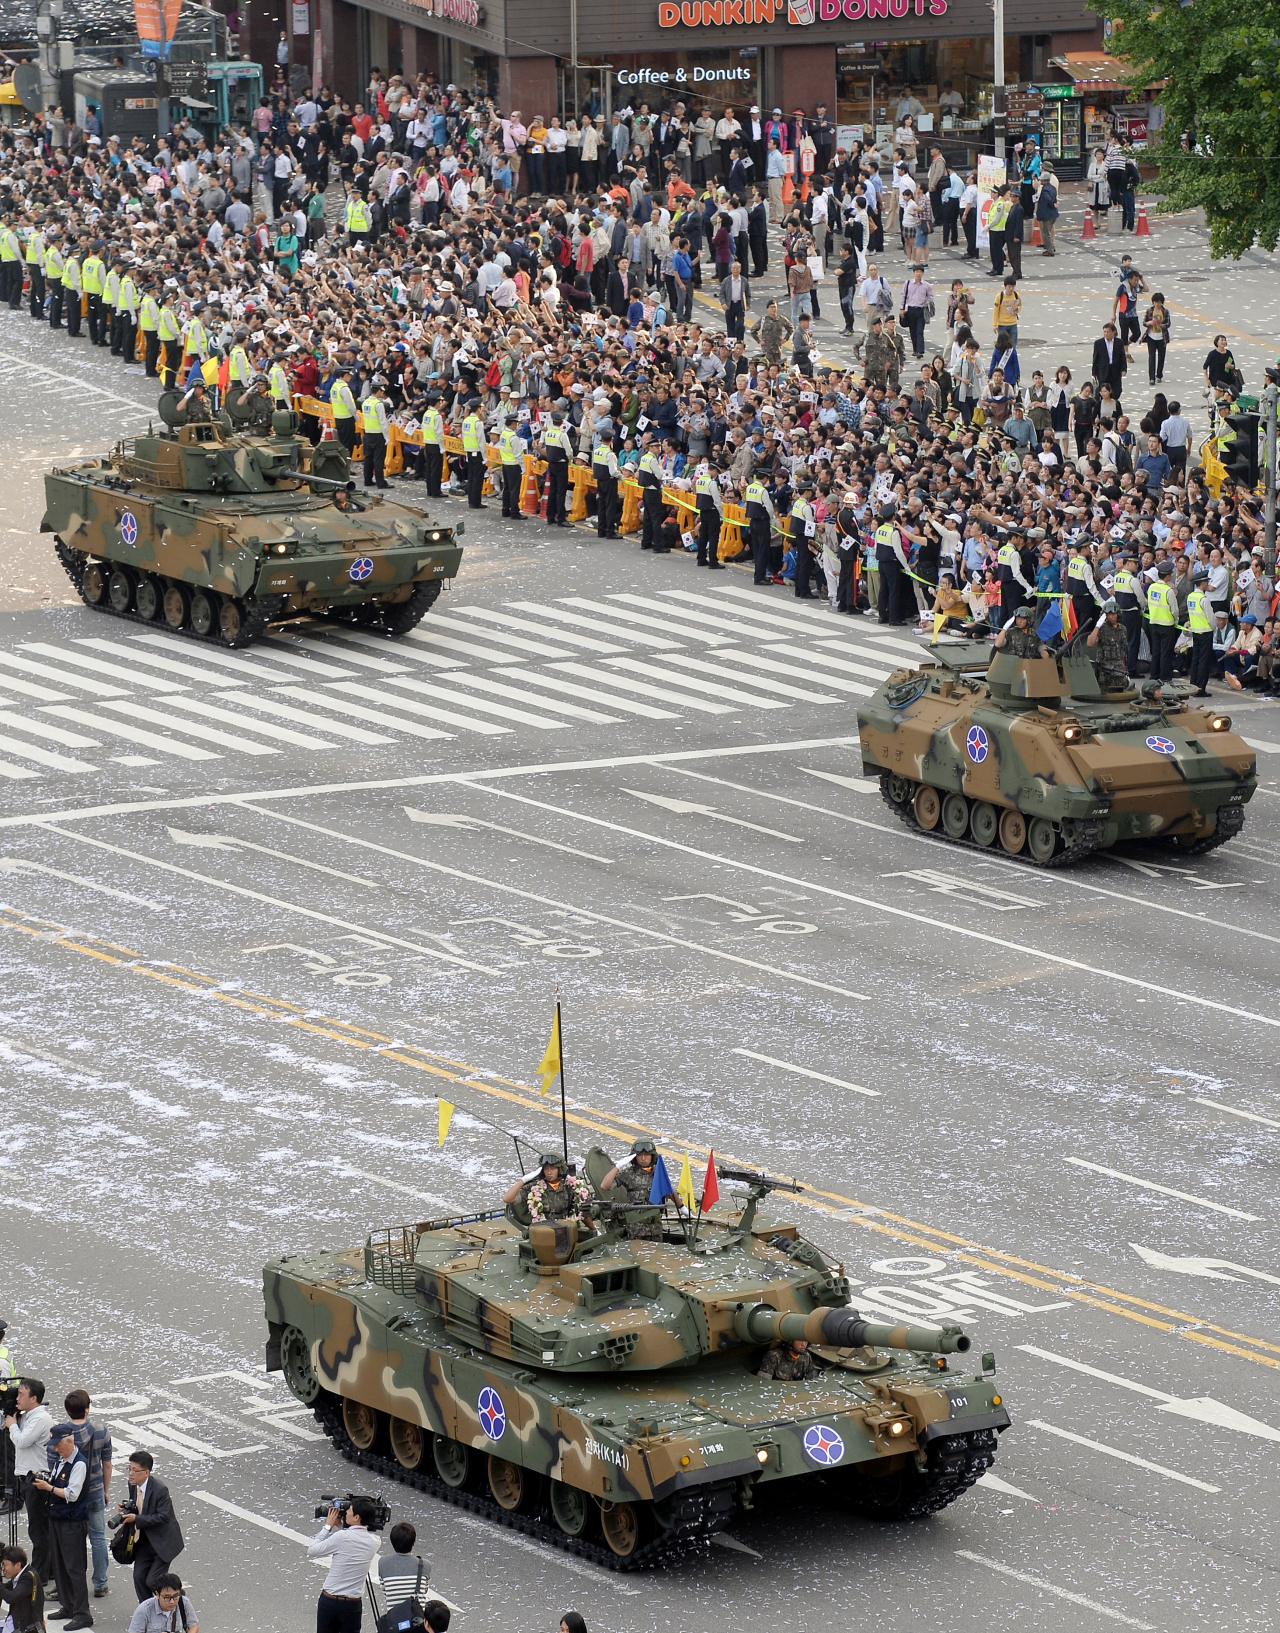 South Korean armored vehicles march during a military parade in Seoul on Oct. 1, 2013. (Herald DB)